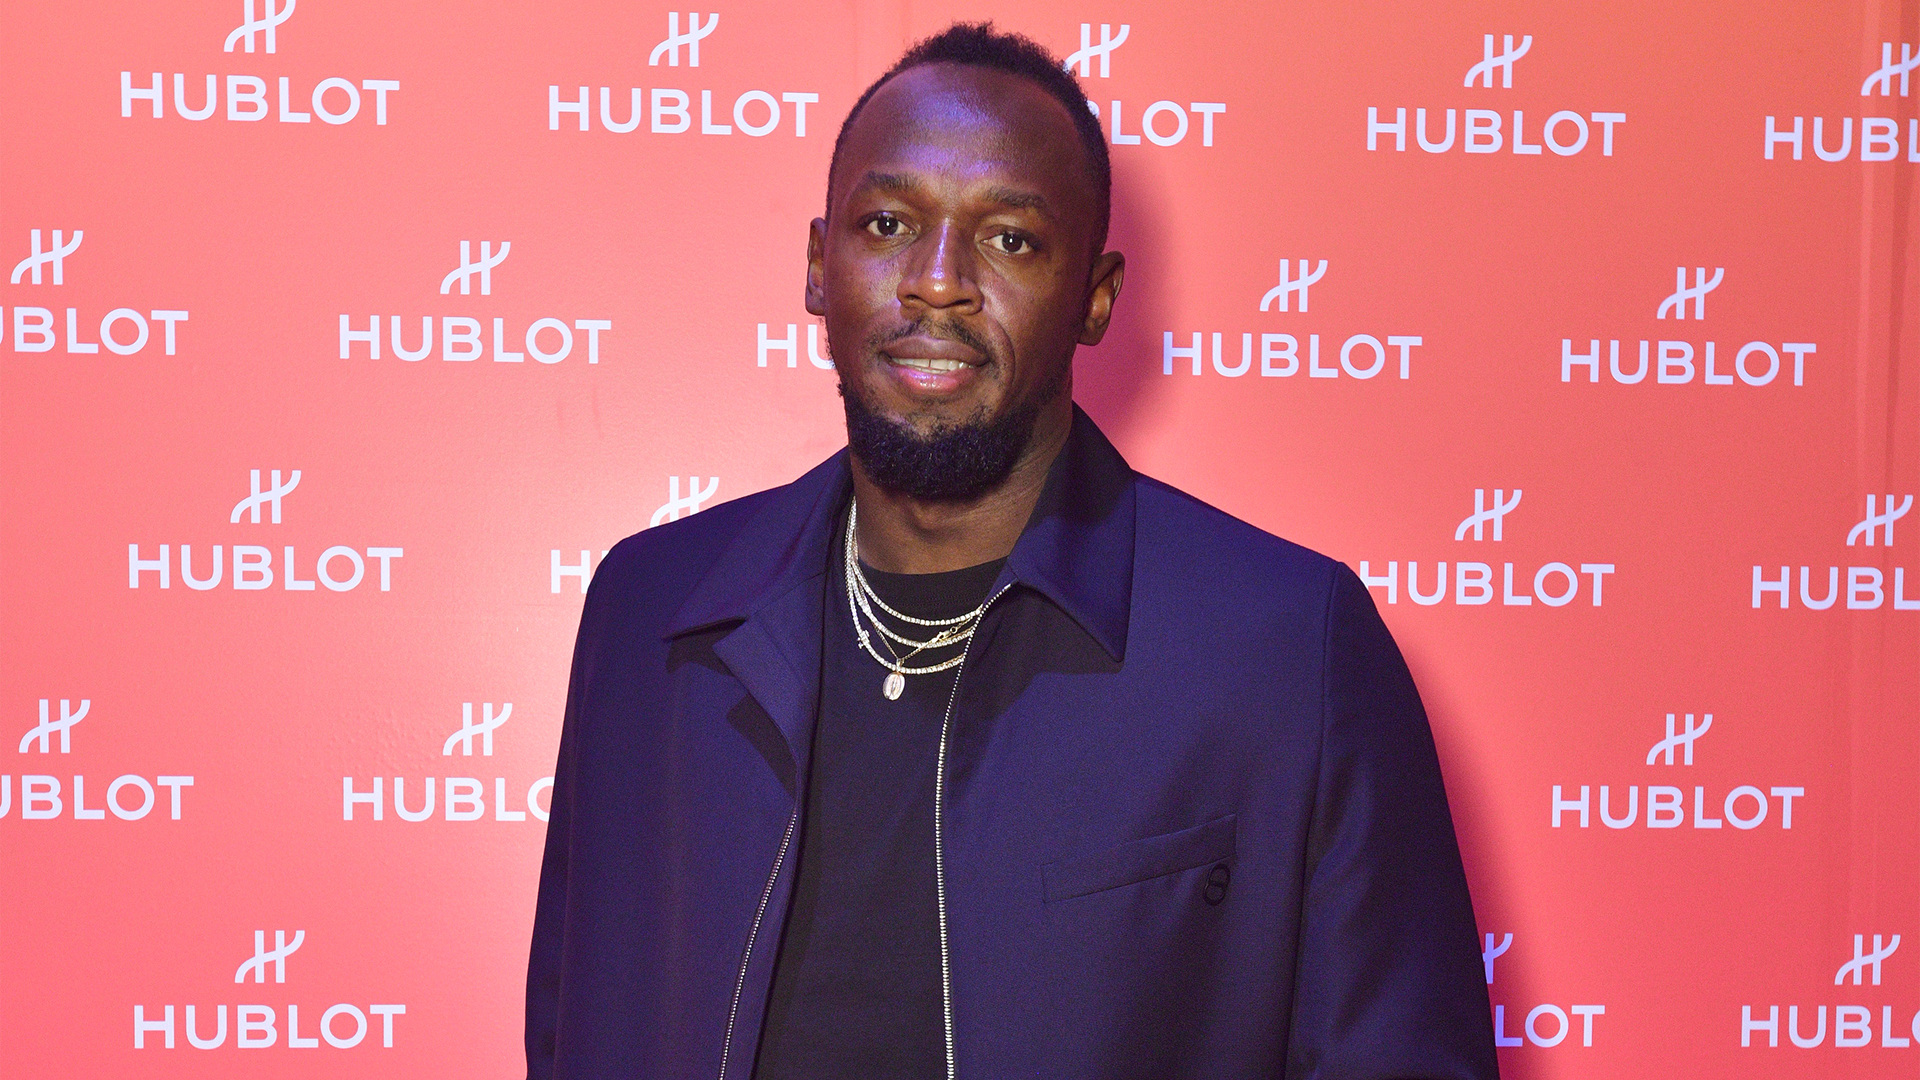 Olympic Gold Medalist Usain Bolt Becomes Co-Owner Of Esports Organization WYLDE